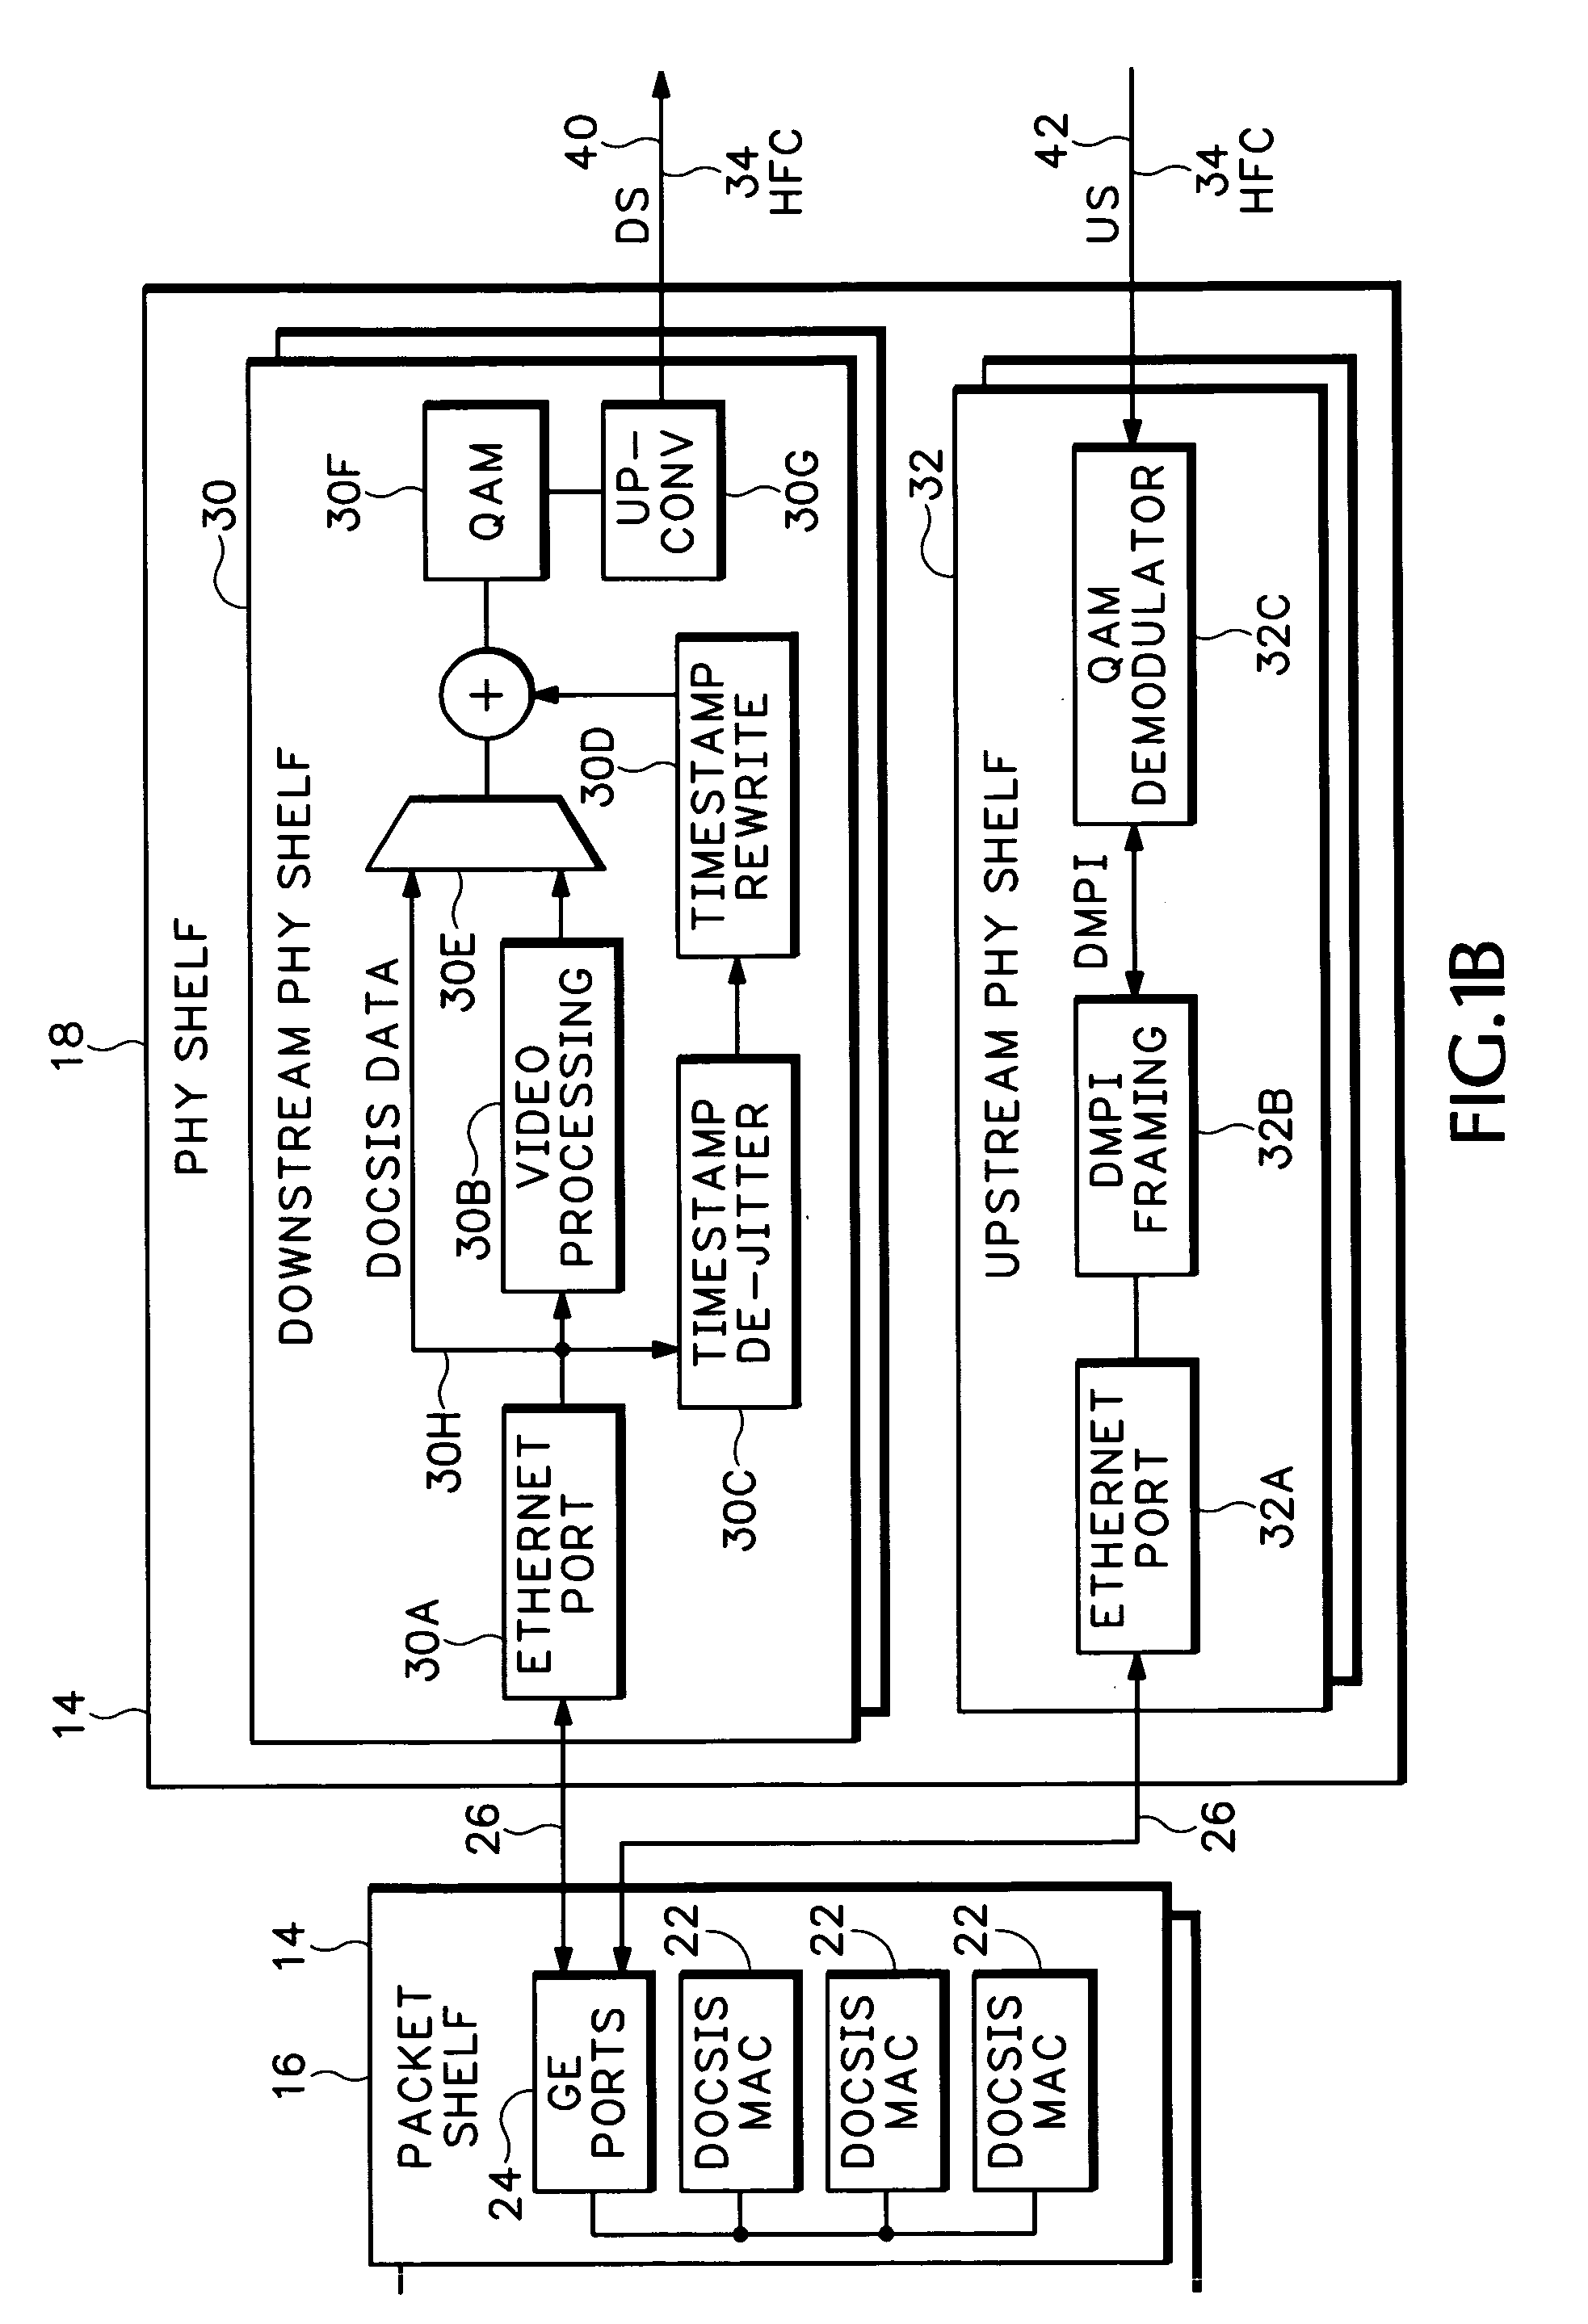 Downstream remote physical interface for modular cable modem termination system